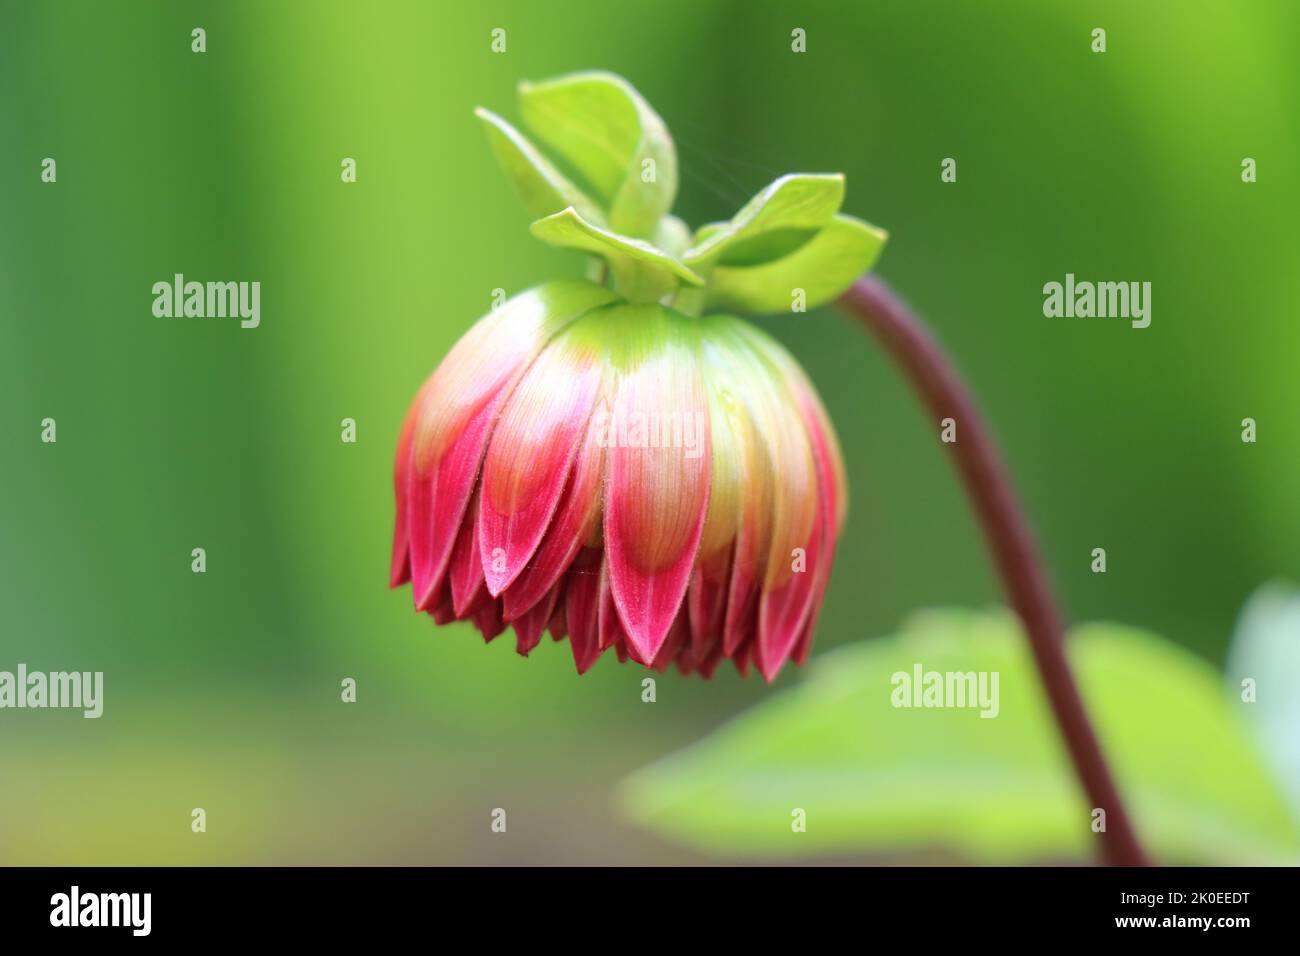 Macro of a beautiful dahlia flower bud ready to bloom on a natural green background Stock Photo